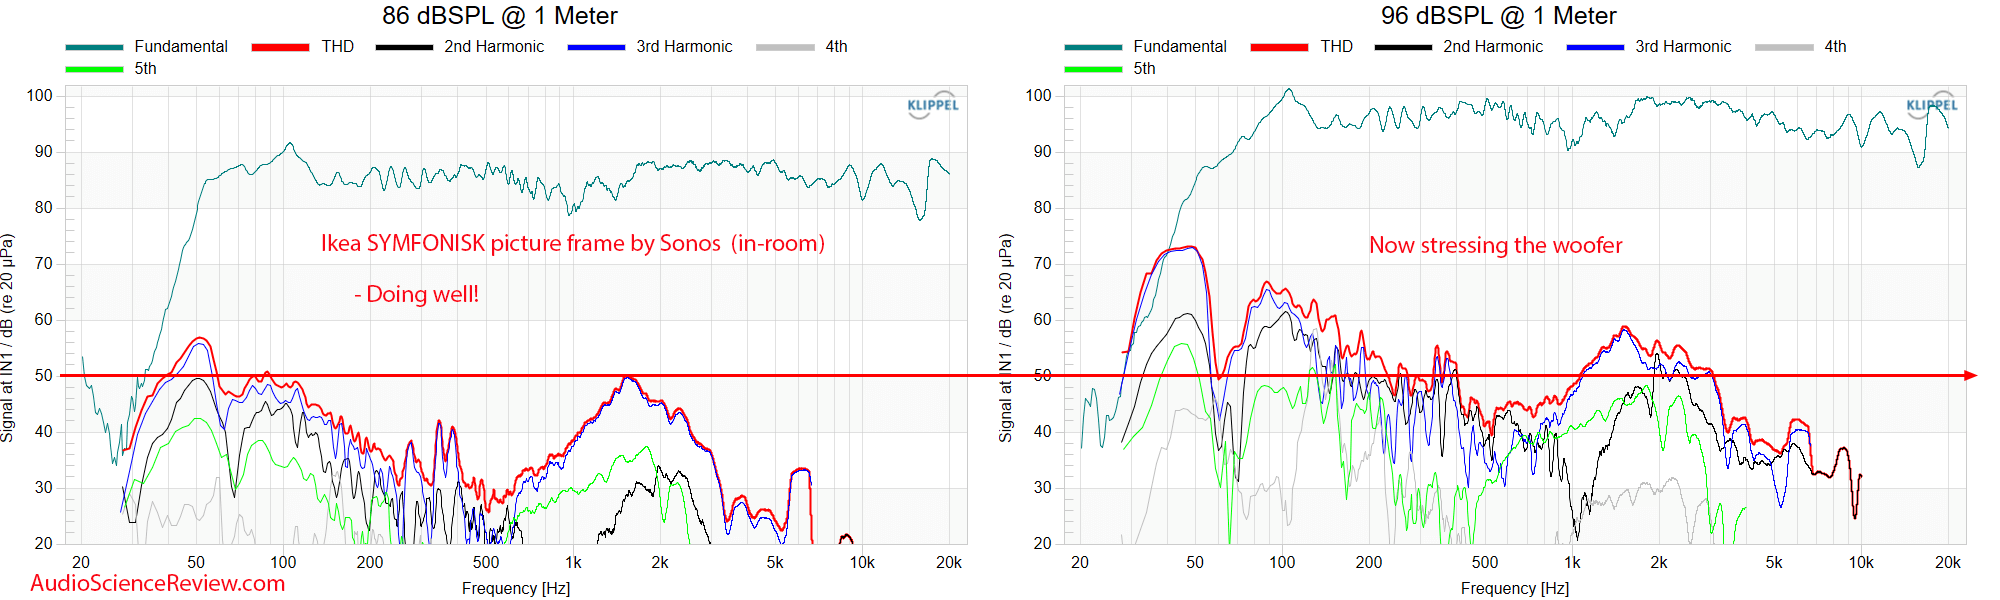 Ikea SYMFONISK picture frame THD distortion vs Speaker Frequency Response Measurements by Sonos.png